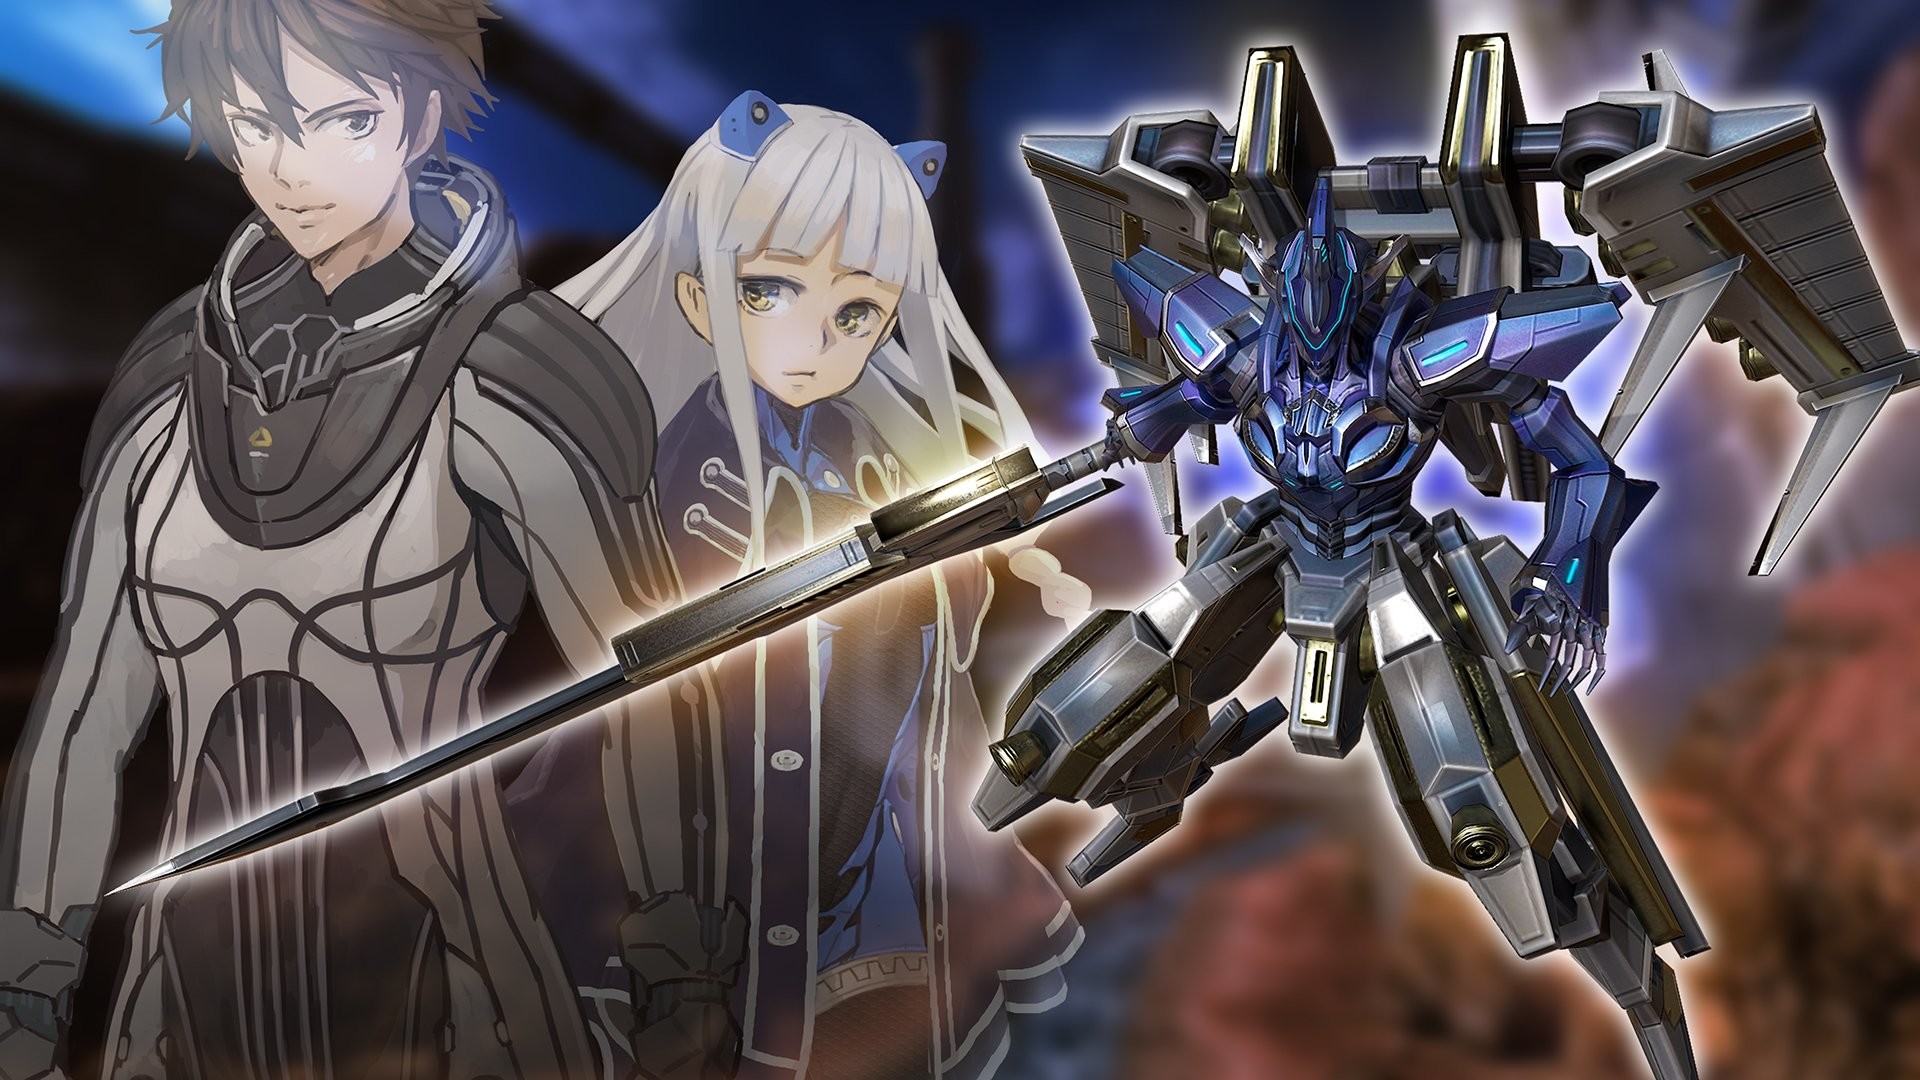 1920x1080 ASTEBREED sci-fi anime shooter fantasy action fighting mecha wallpaper |   | 833273 | WallpaperUP